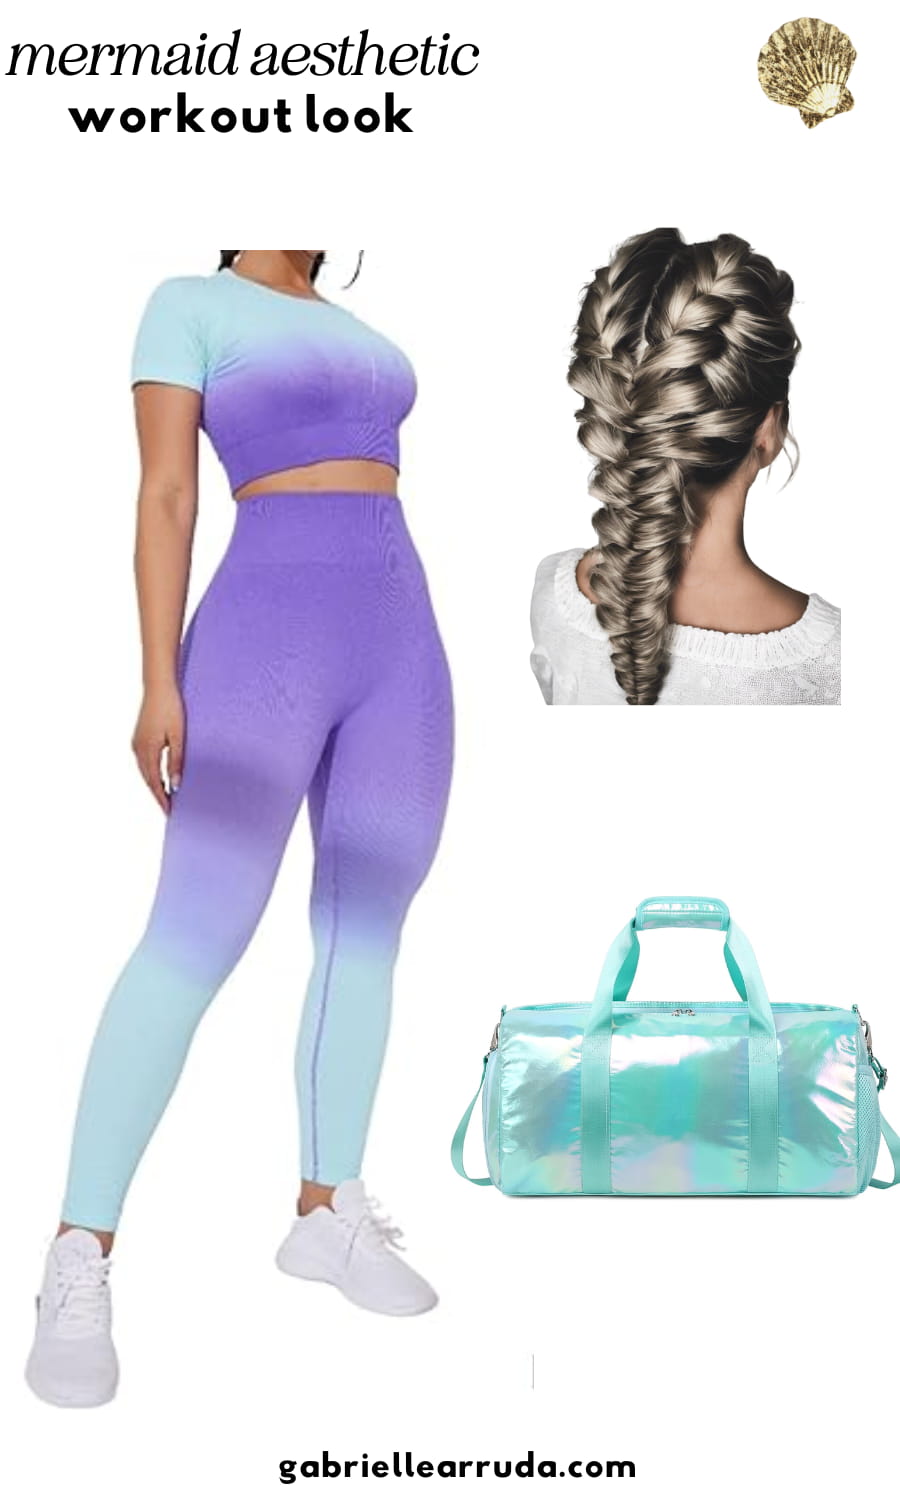 workout look with mermaid aesthetic influence